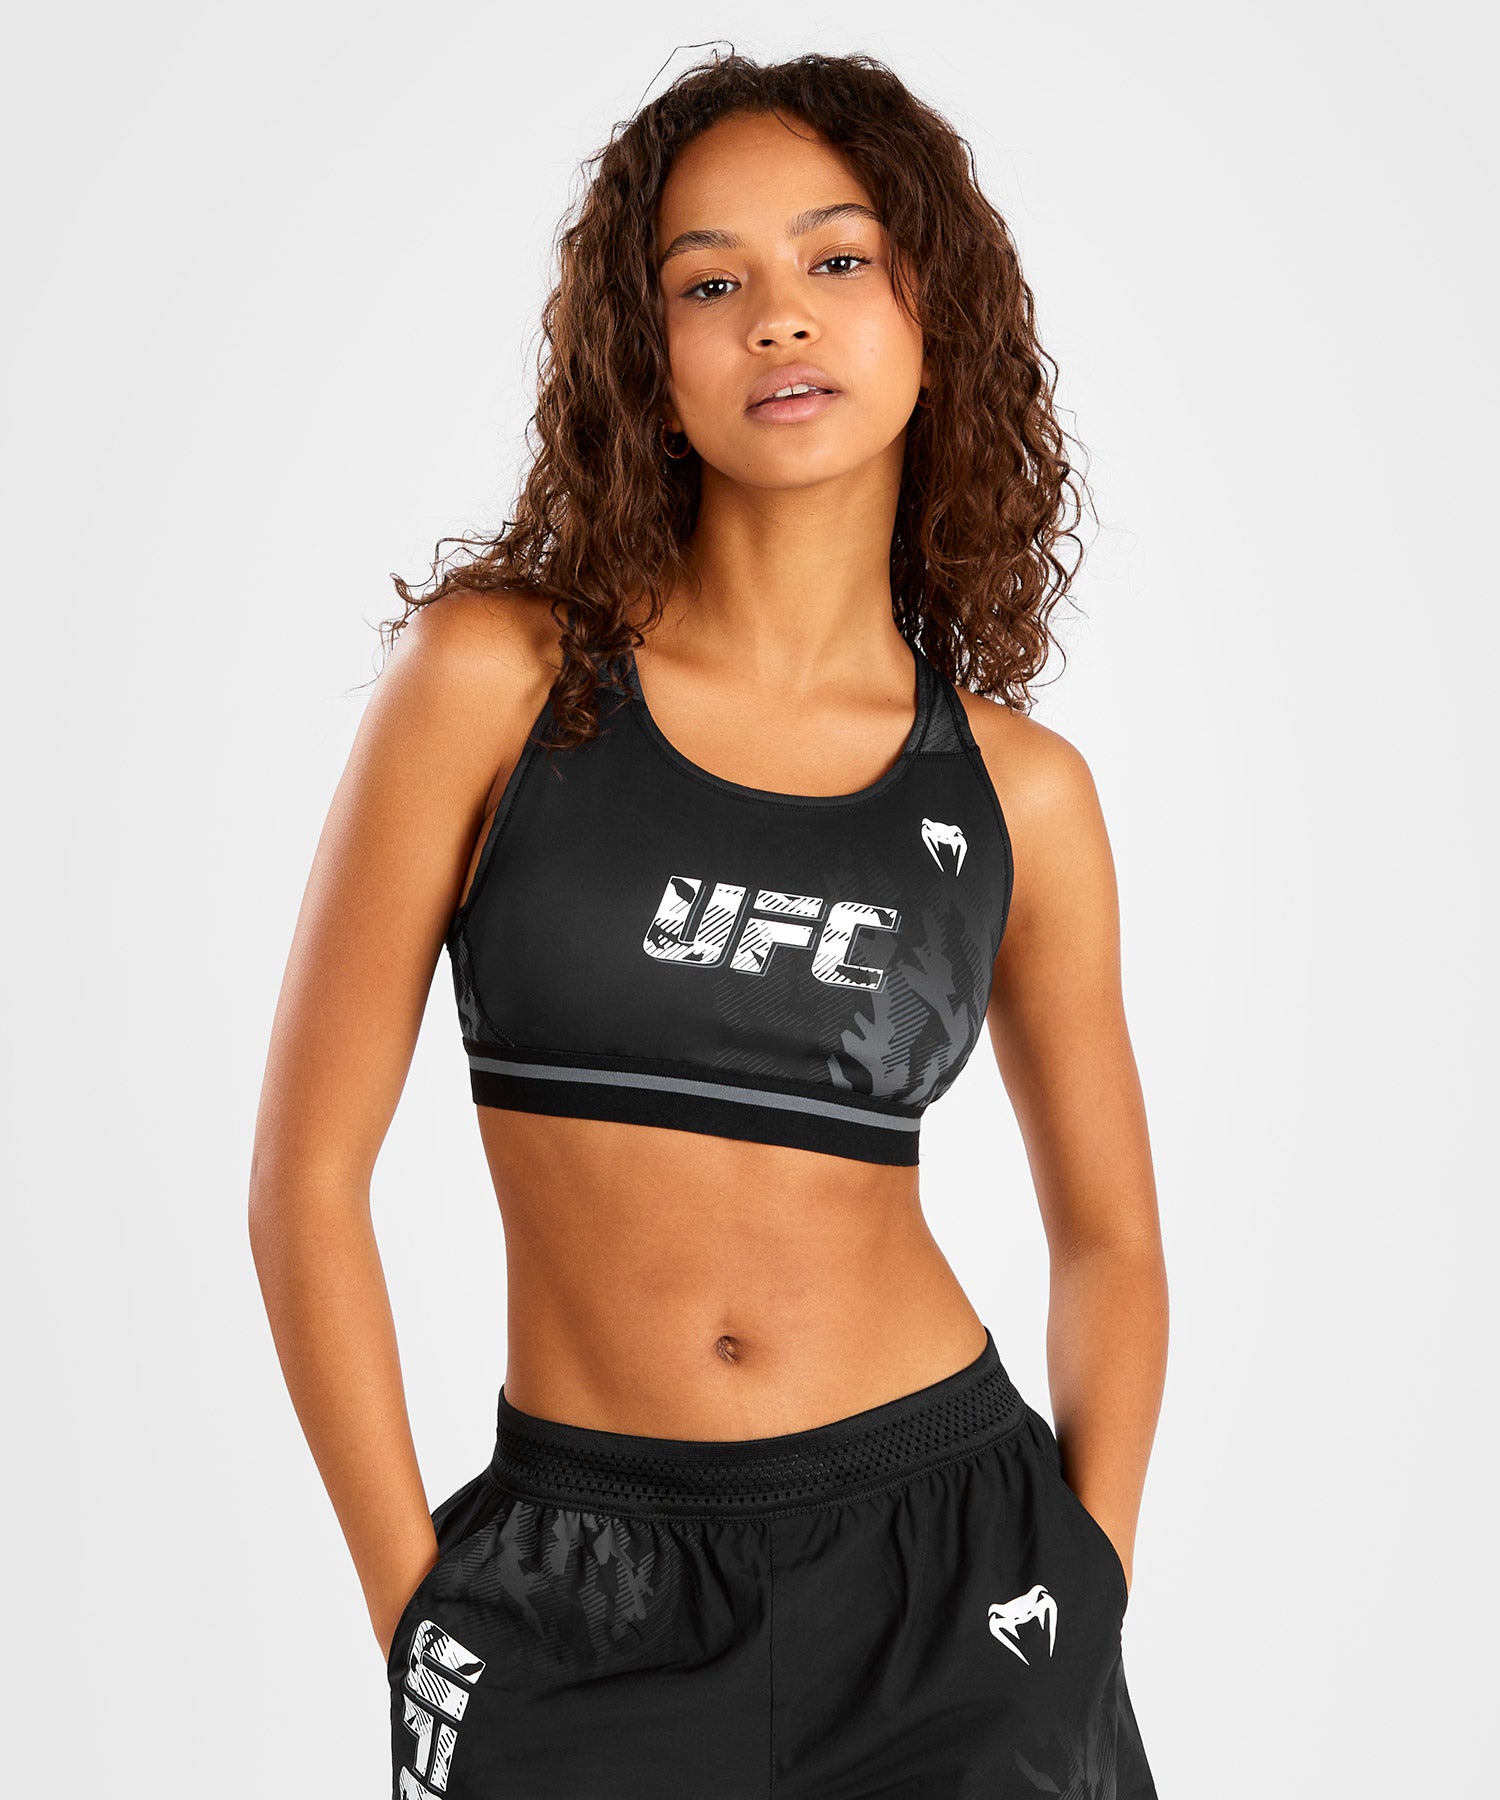 rebel sport - Stop fighting with your sports bra and focus on what